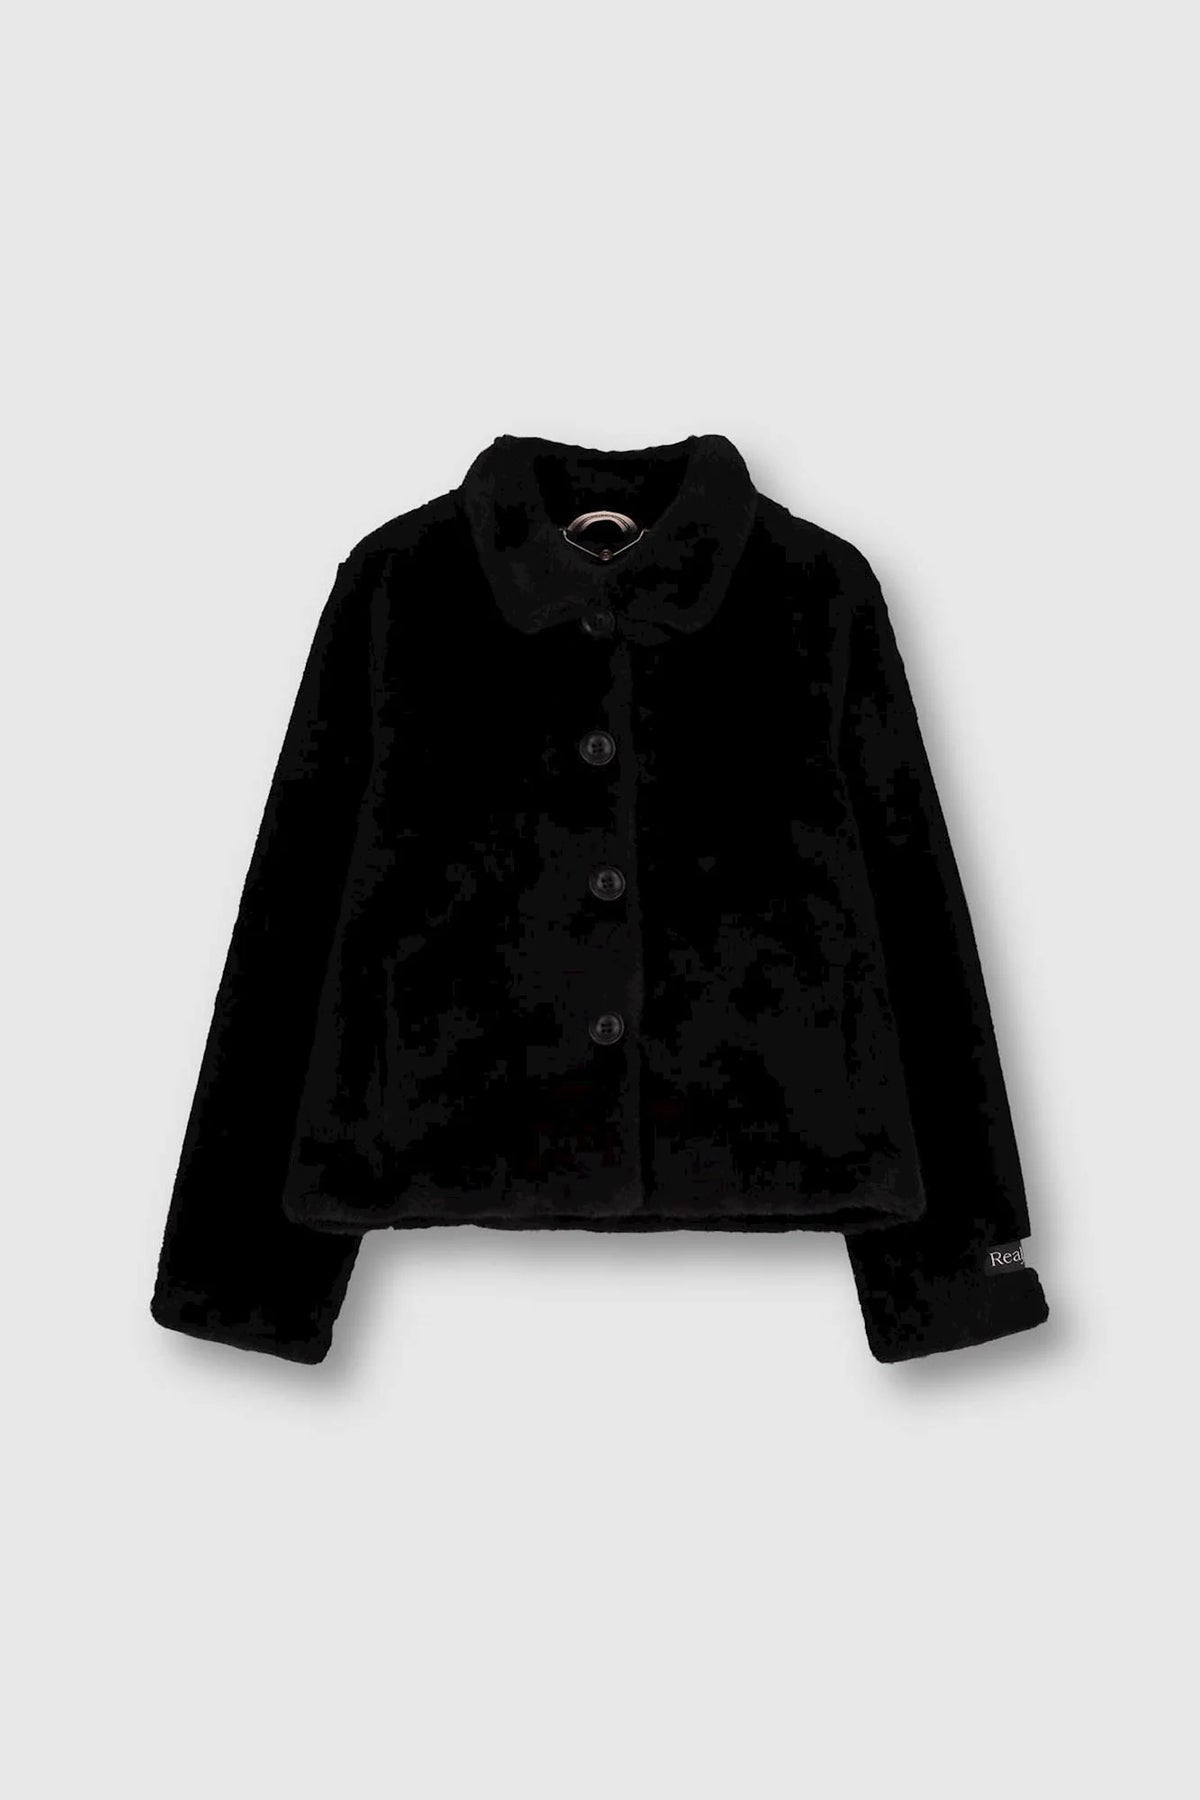 Short faux fur black jacket with button fastening and classic collar